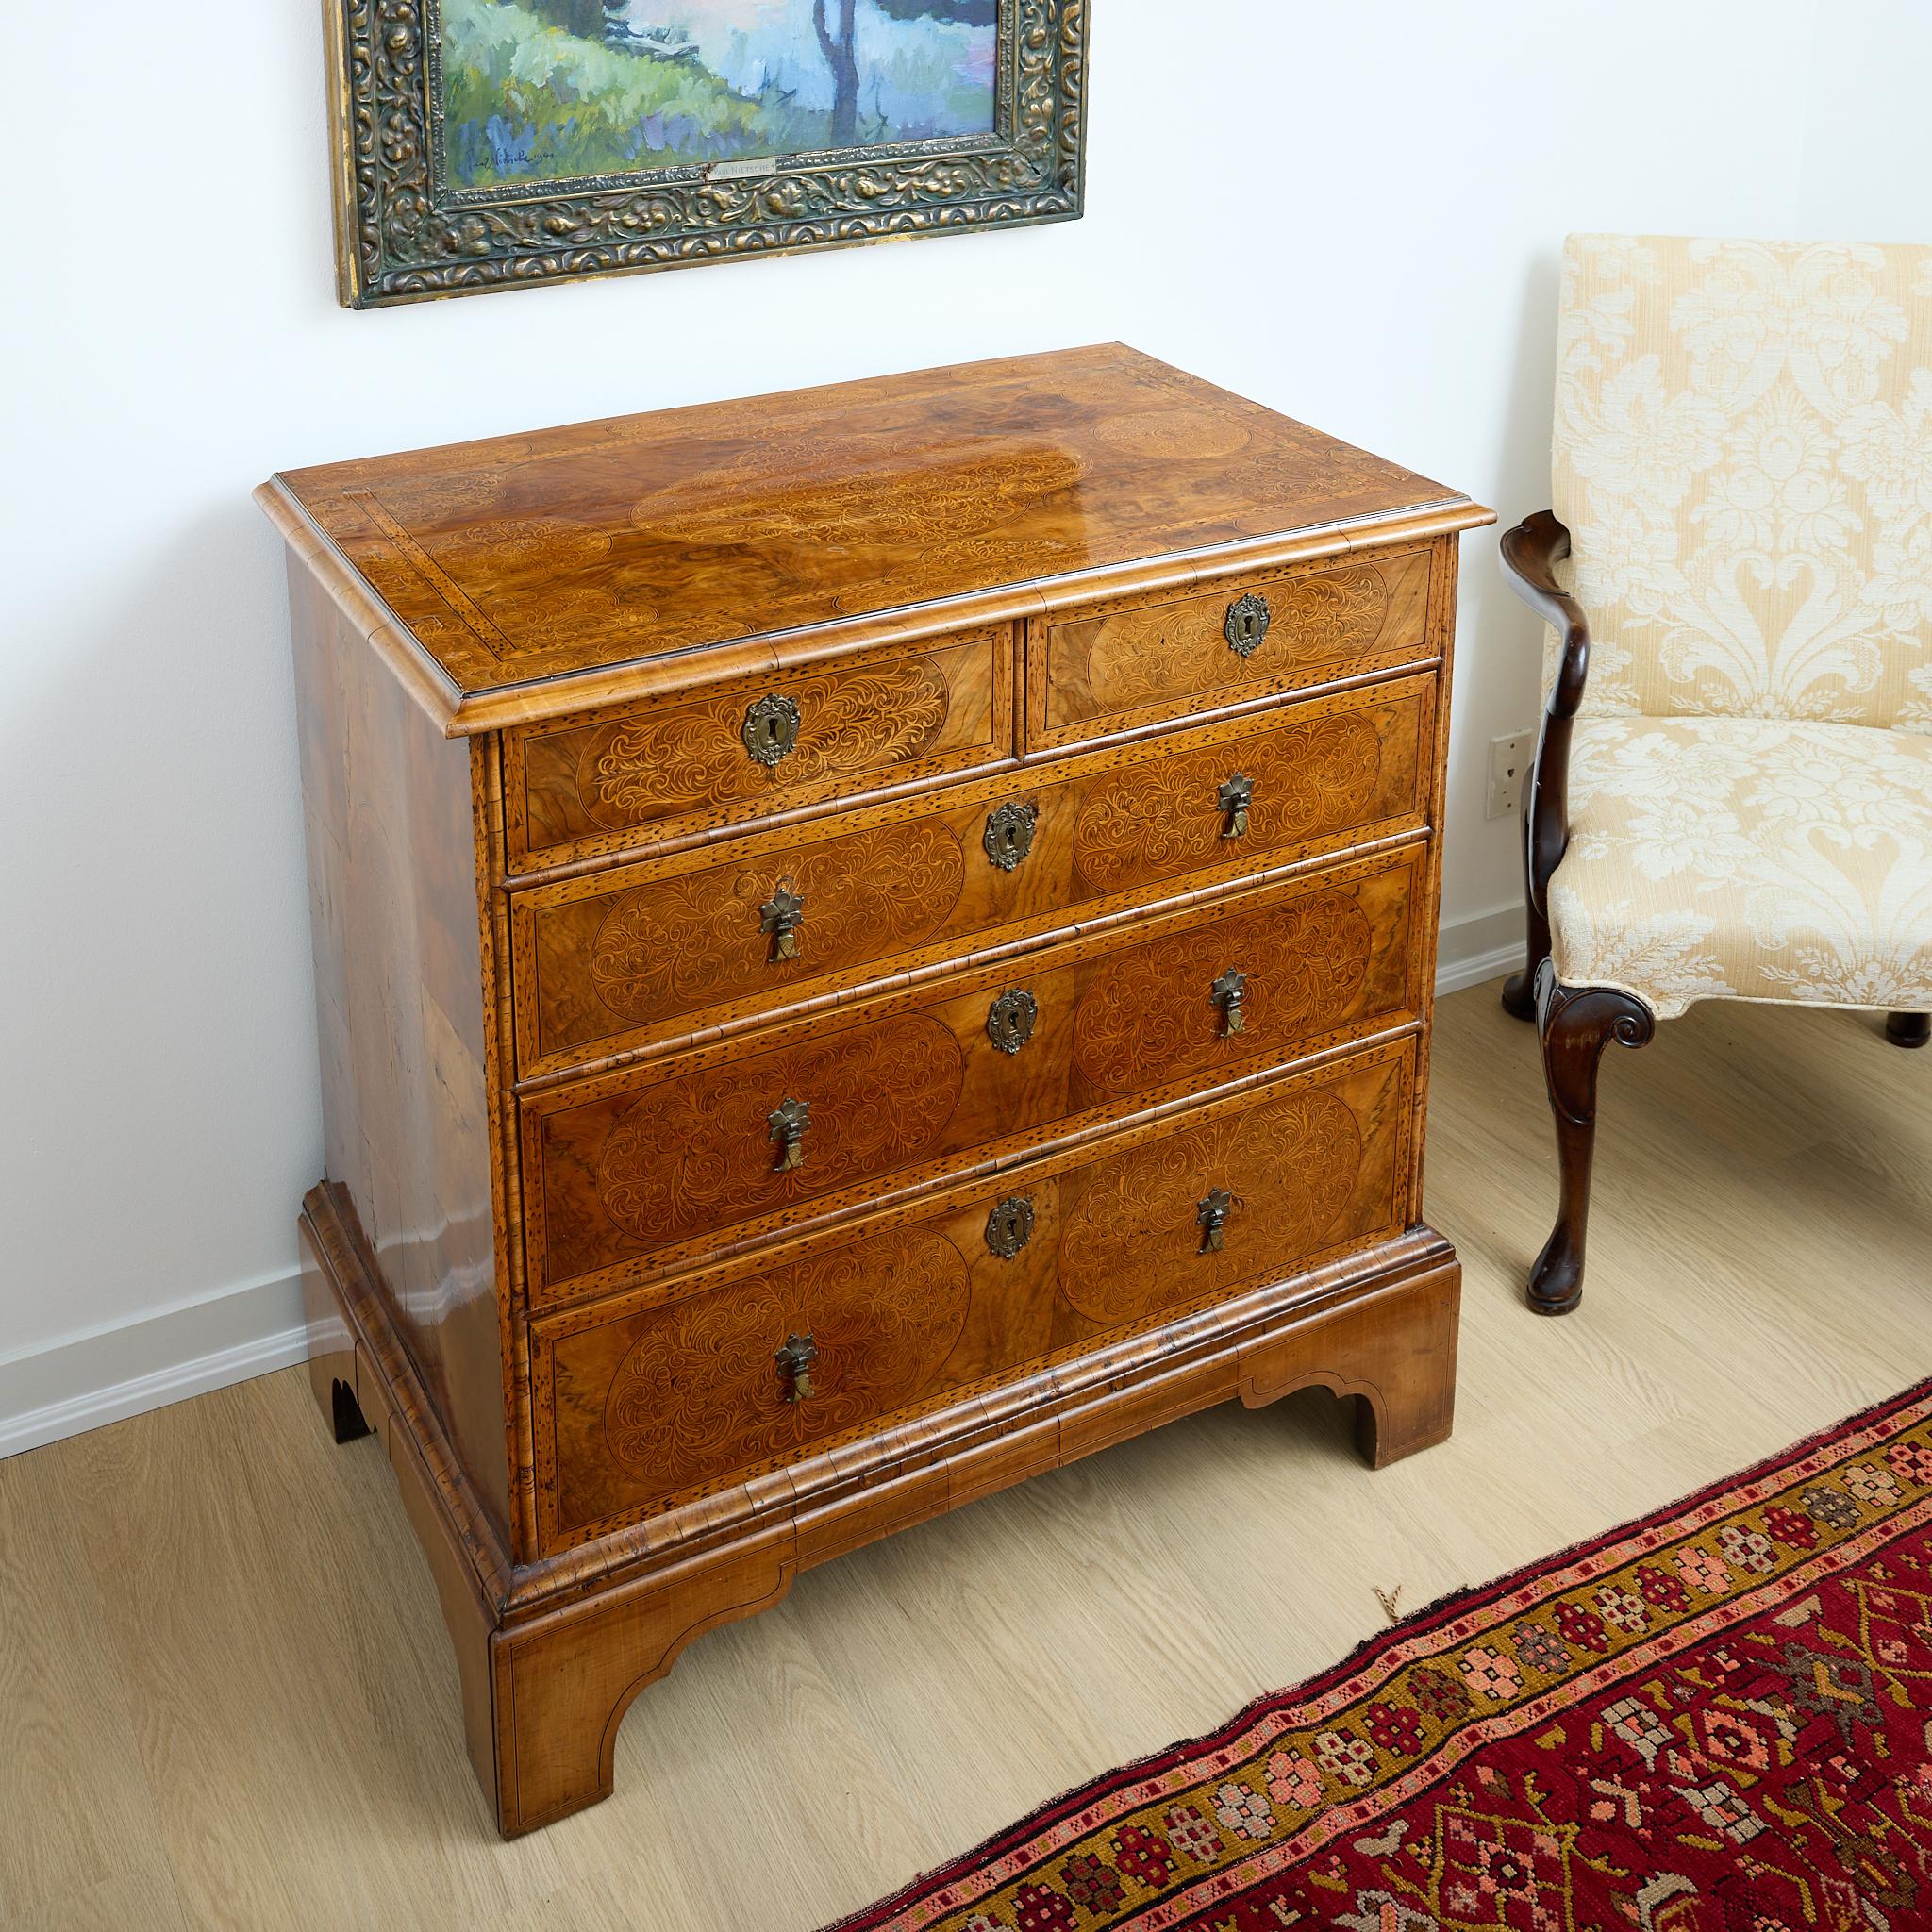 A spectacular 18th century, English, five drawer chest with burled walnut and inlaid fruitwood marquetry throughout. Each drawer has a brass escutcheon and drop pulls, all original. The sides have patchwork veneer and central scrolling marquetry